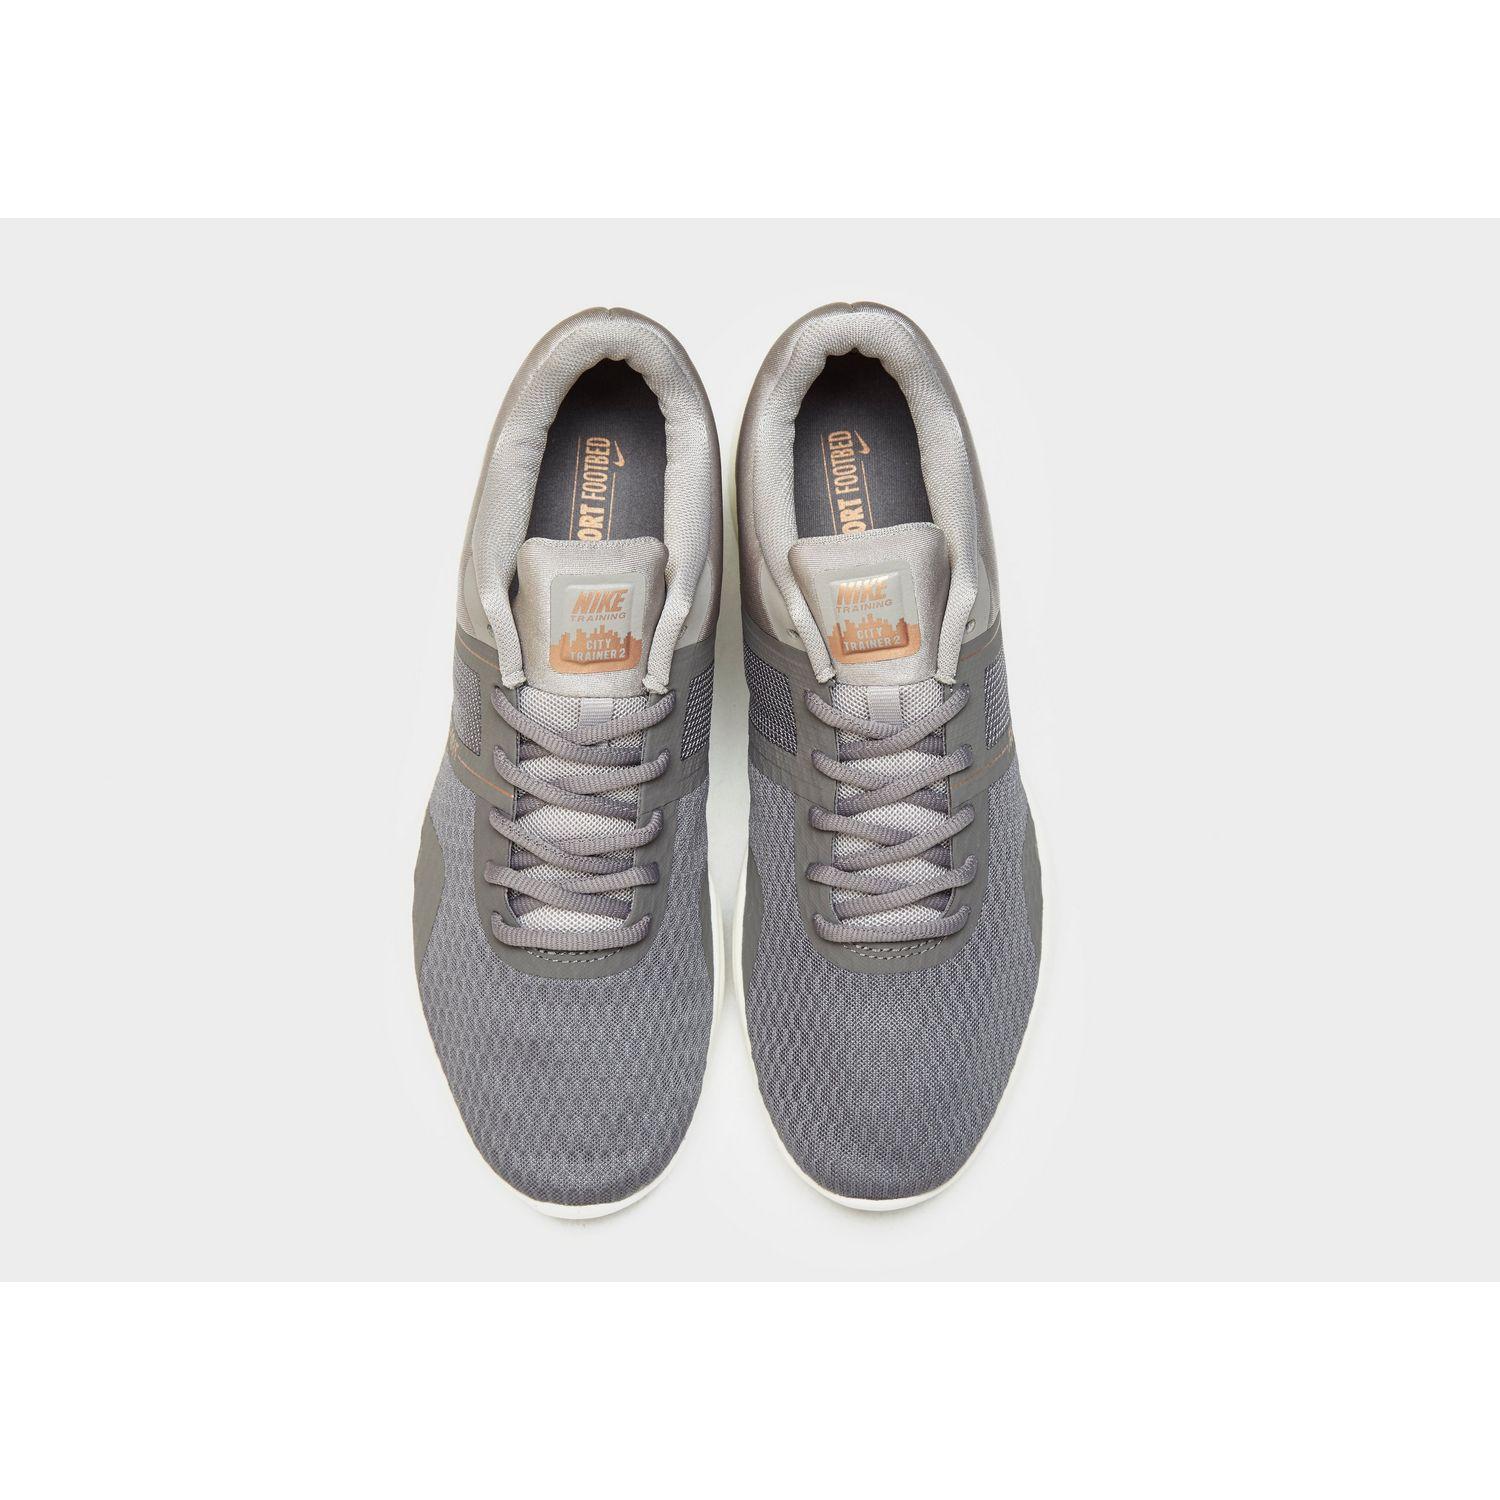 nike grey and gold trainers